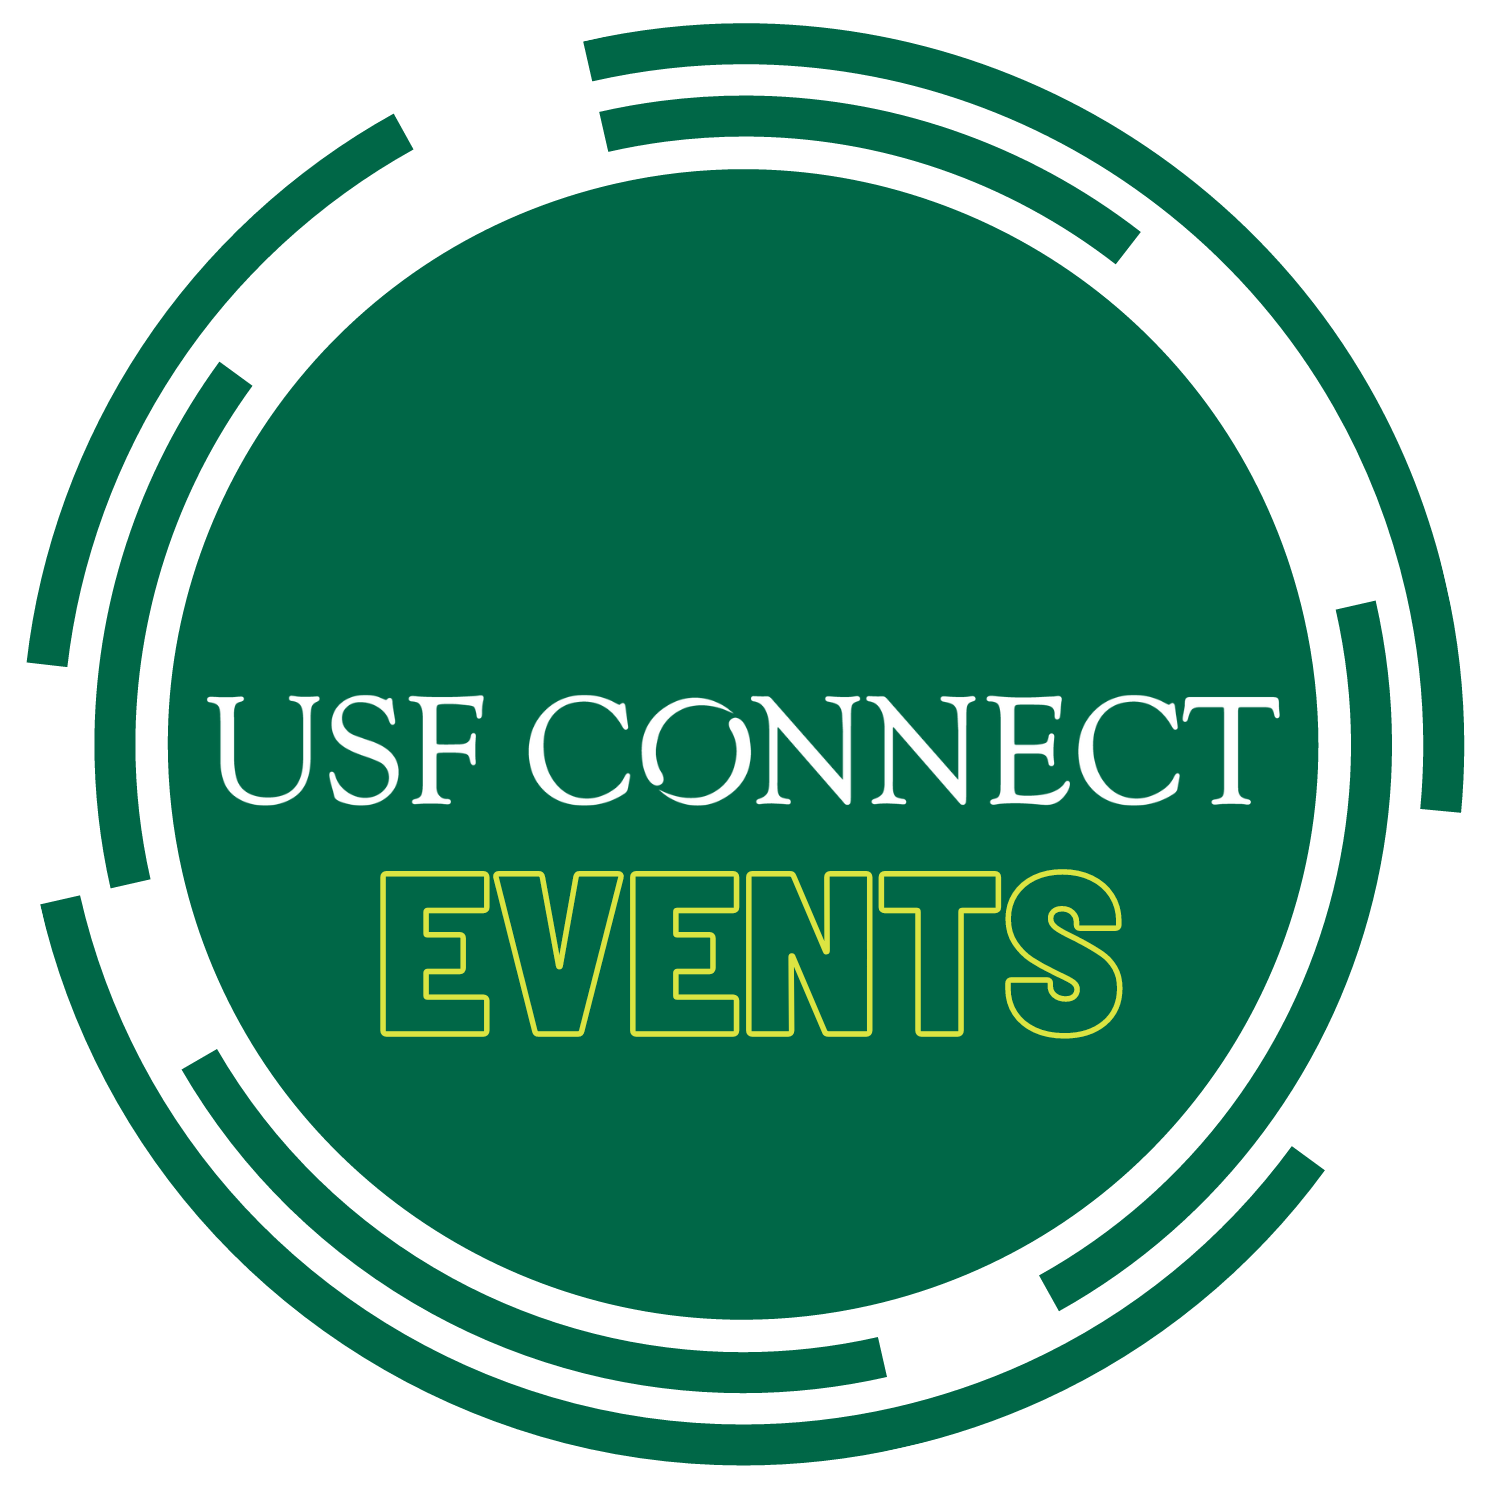 USF CONNECT Events